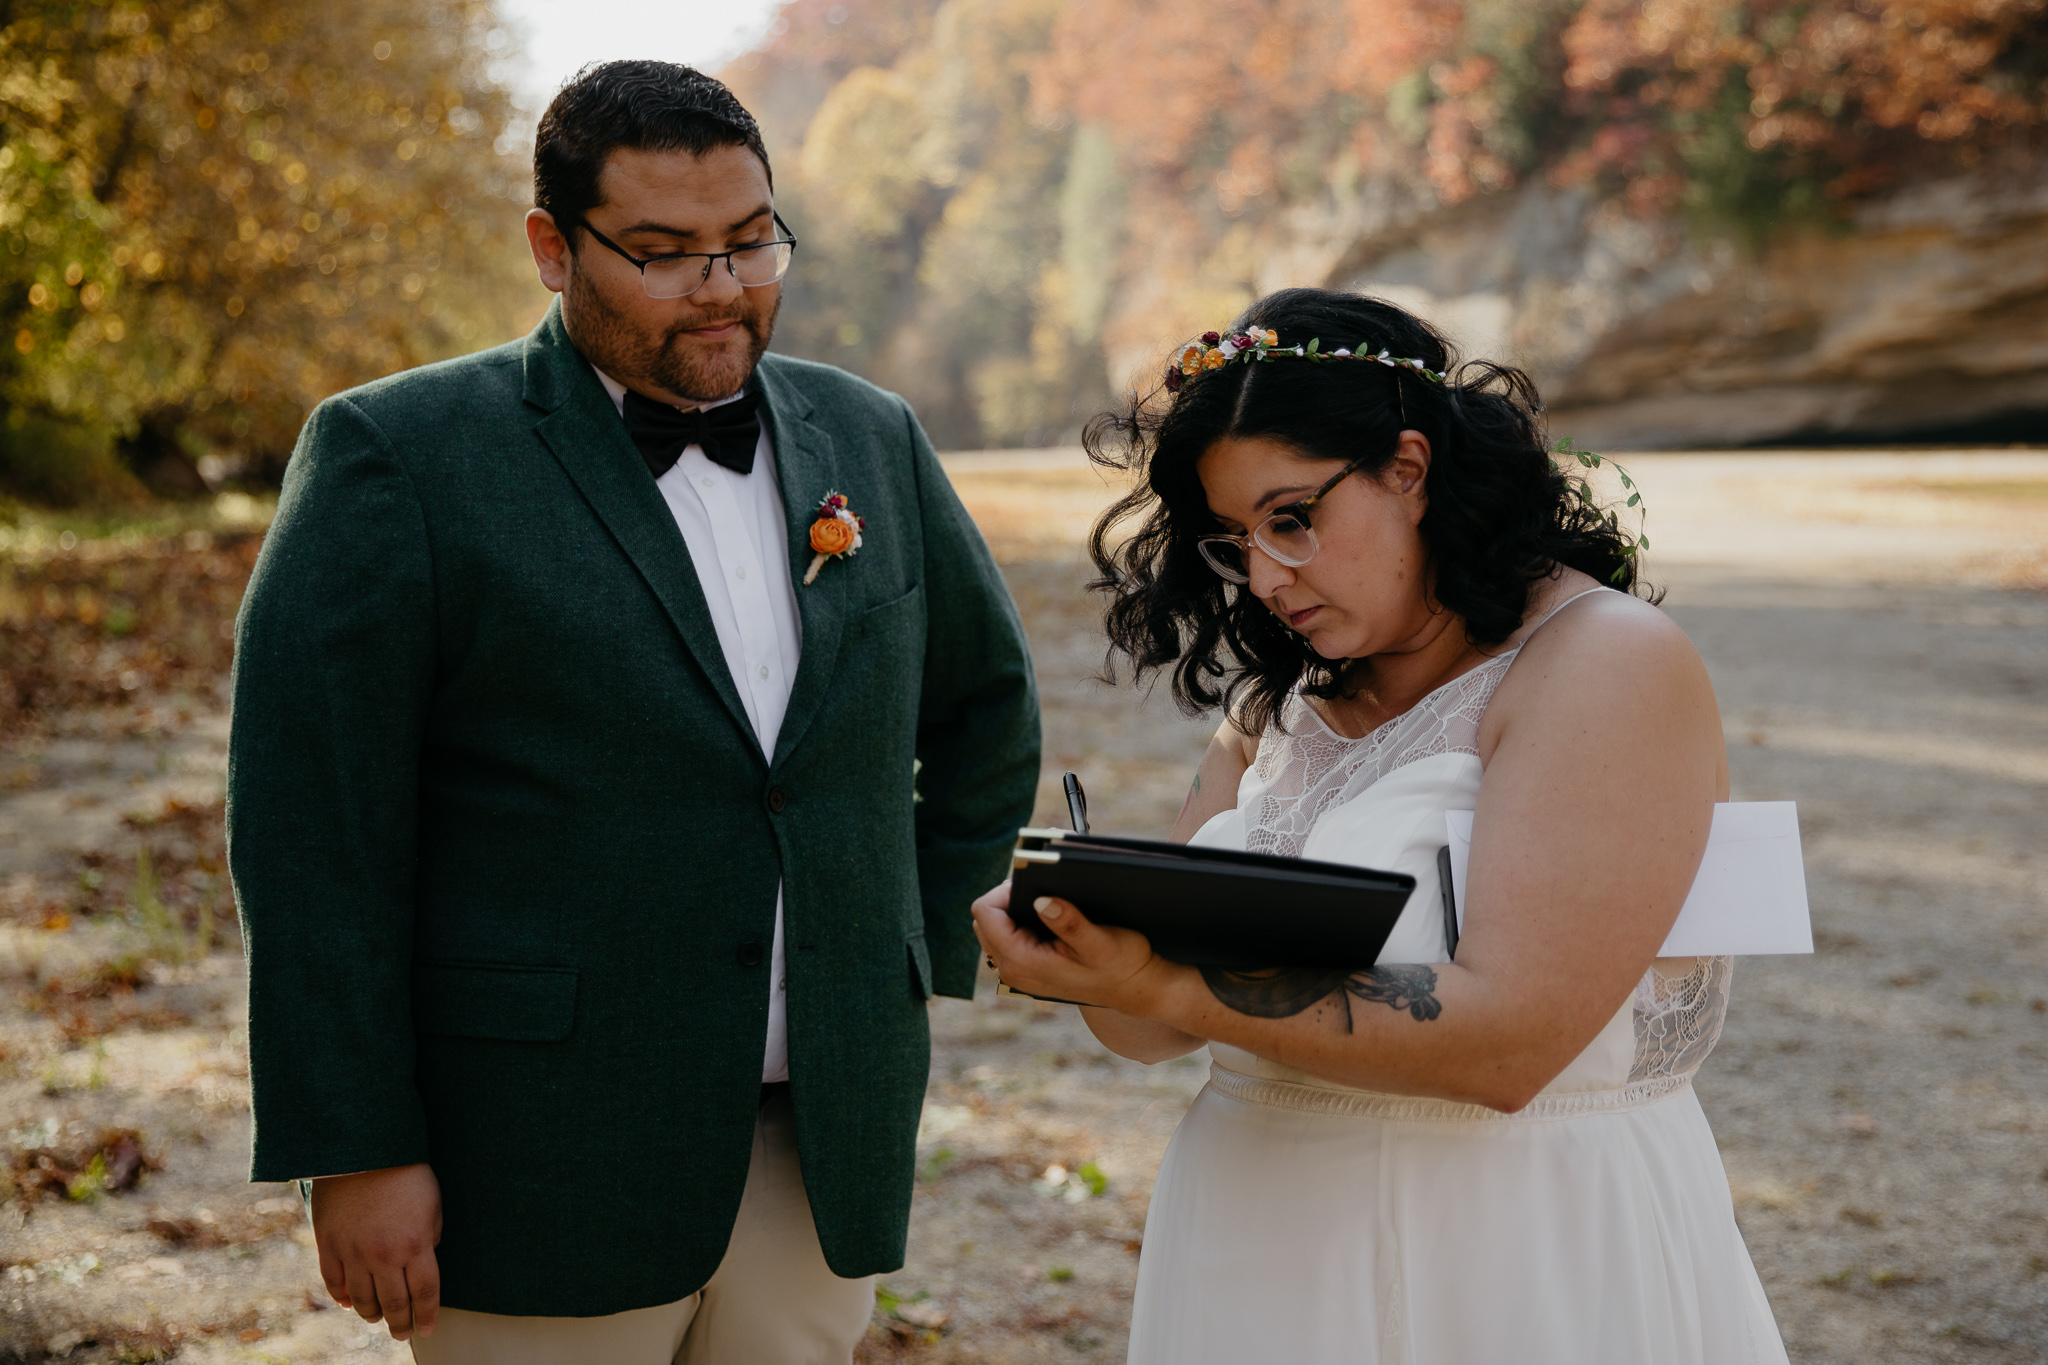 A groom and bride sign their marriage license after their fall elopement ceremony at Sugar Creek, Indiana